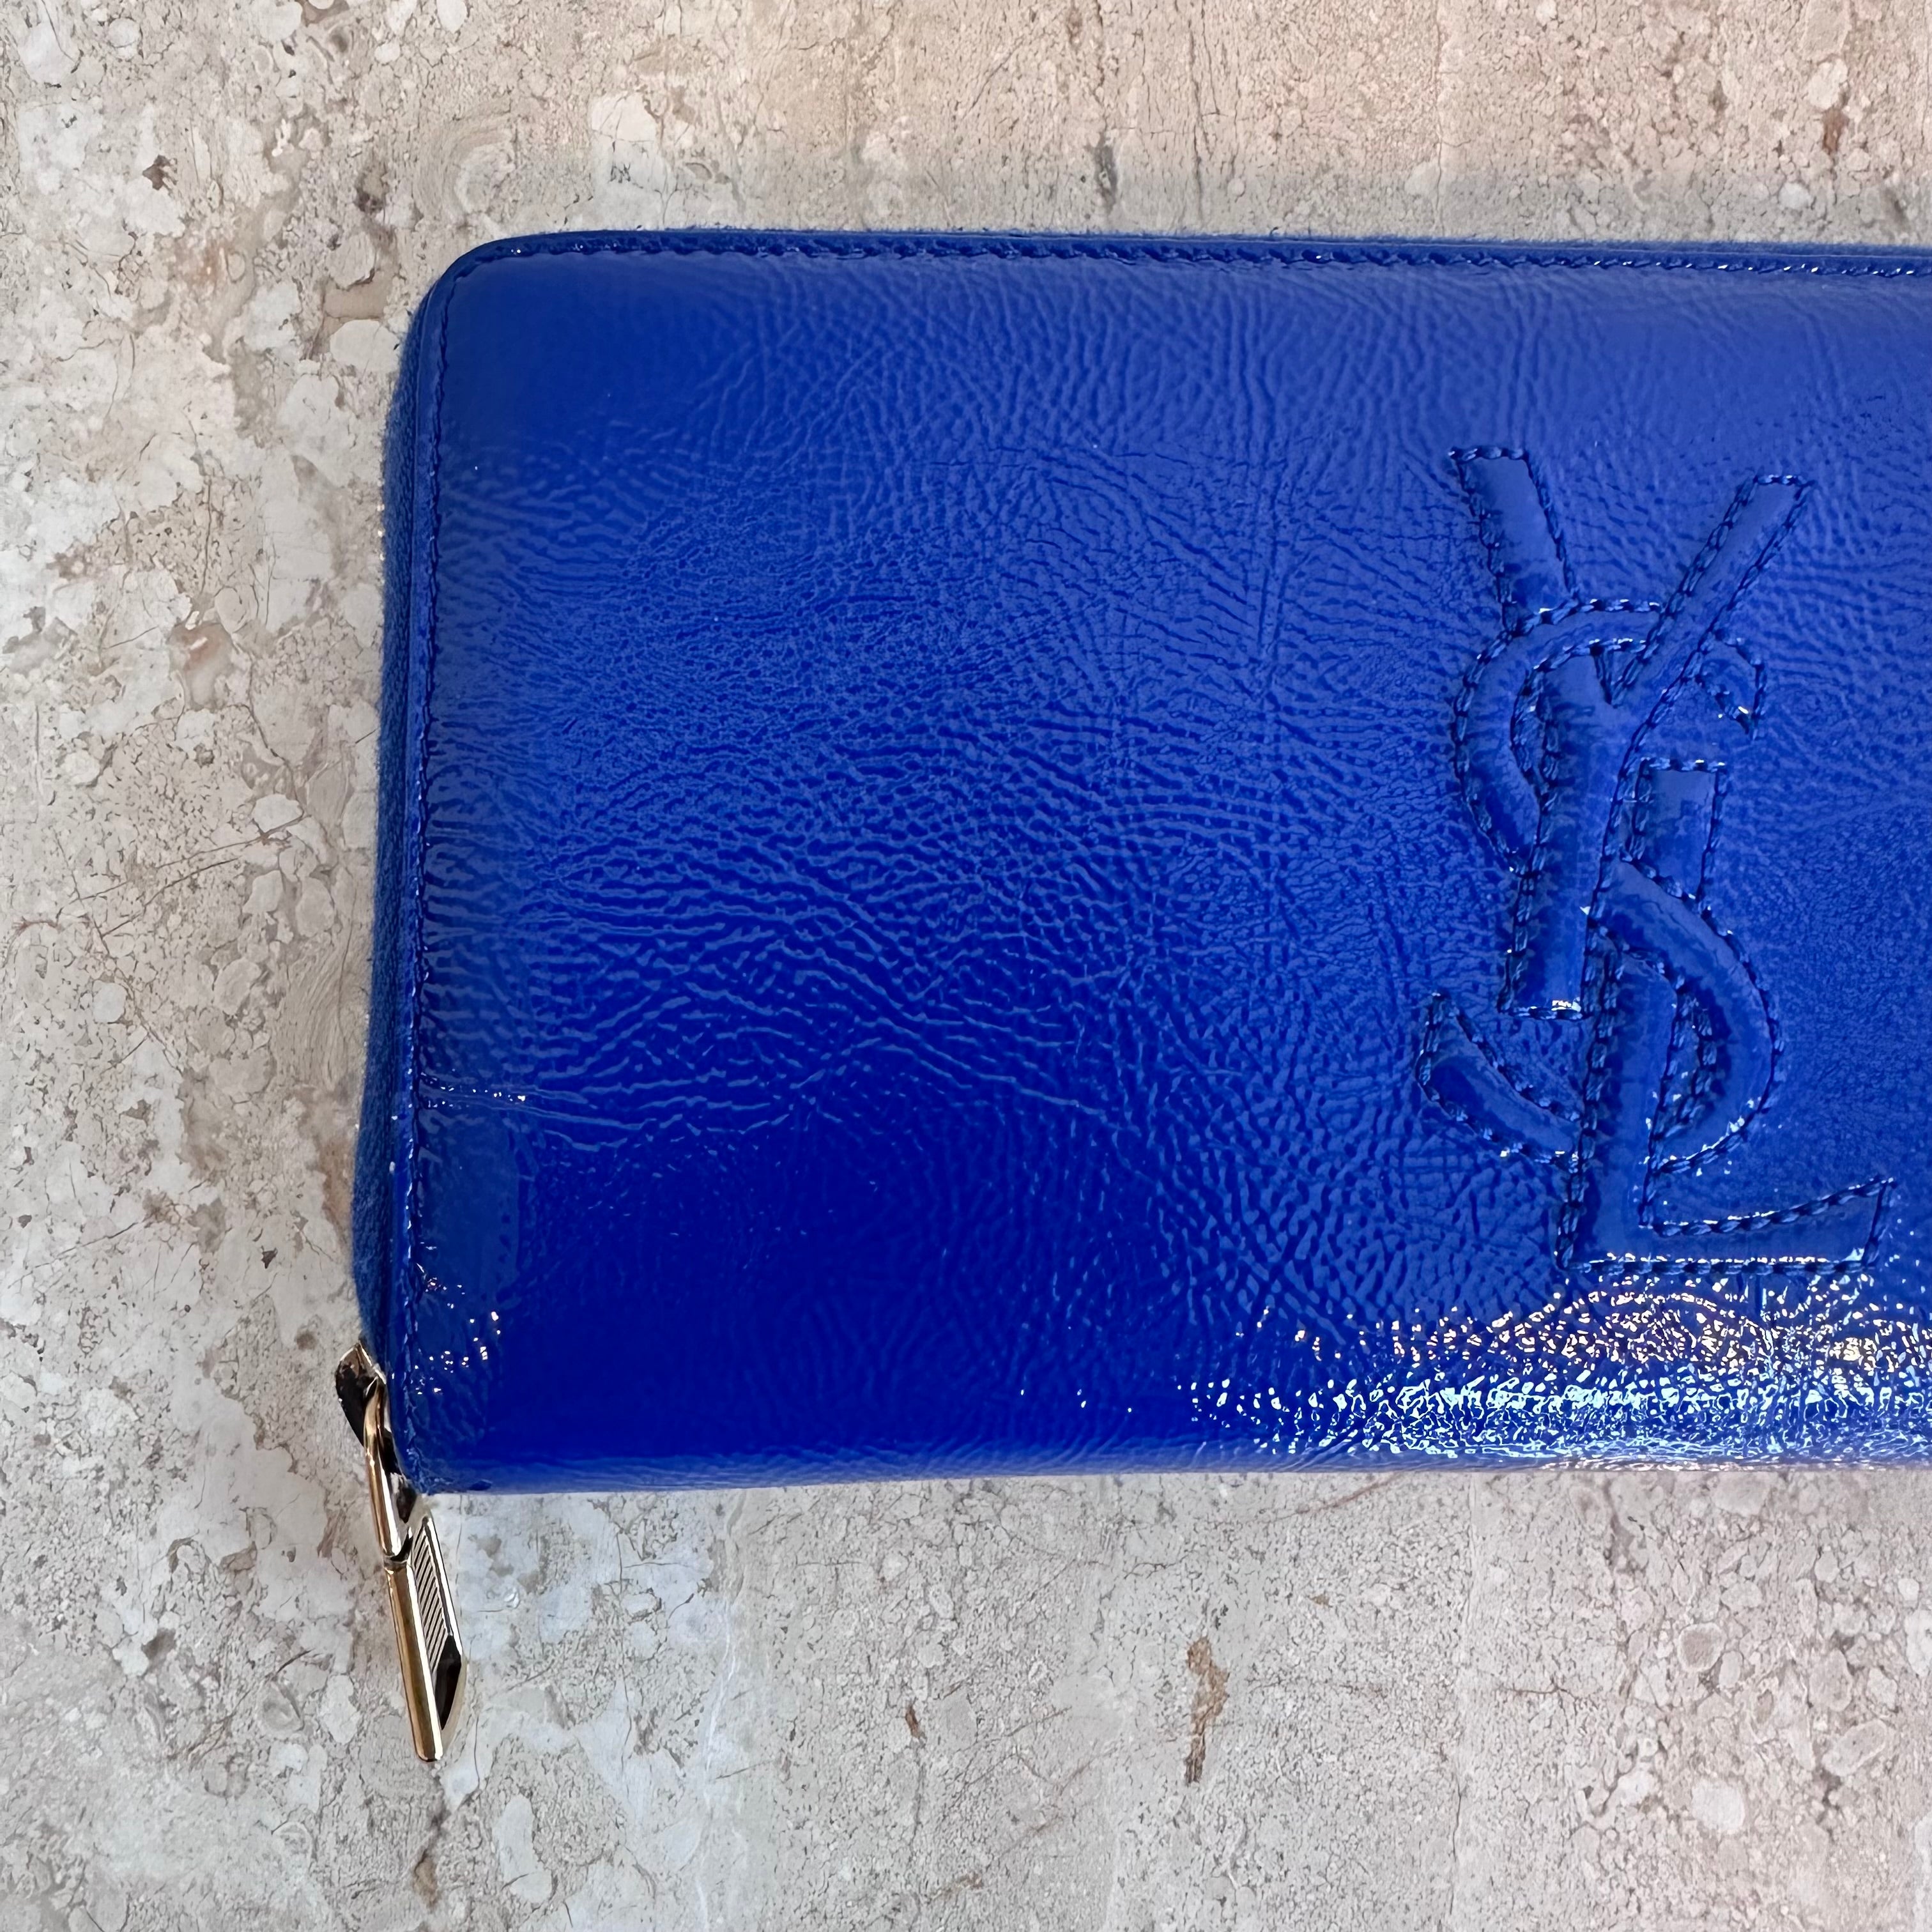 Pre-Owned YVES SAINT LAURENT Patent Wallet